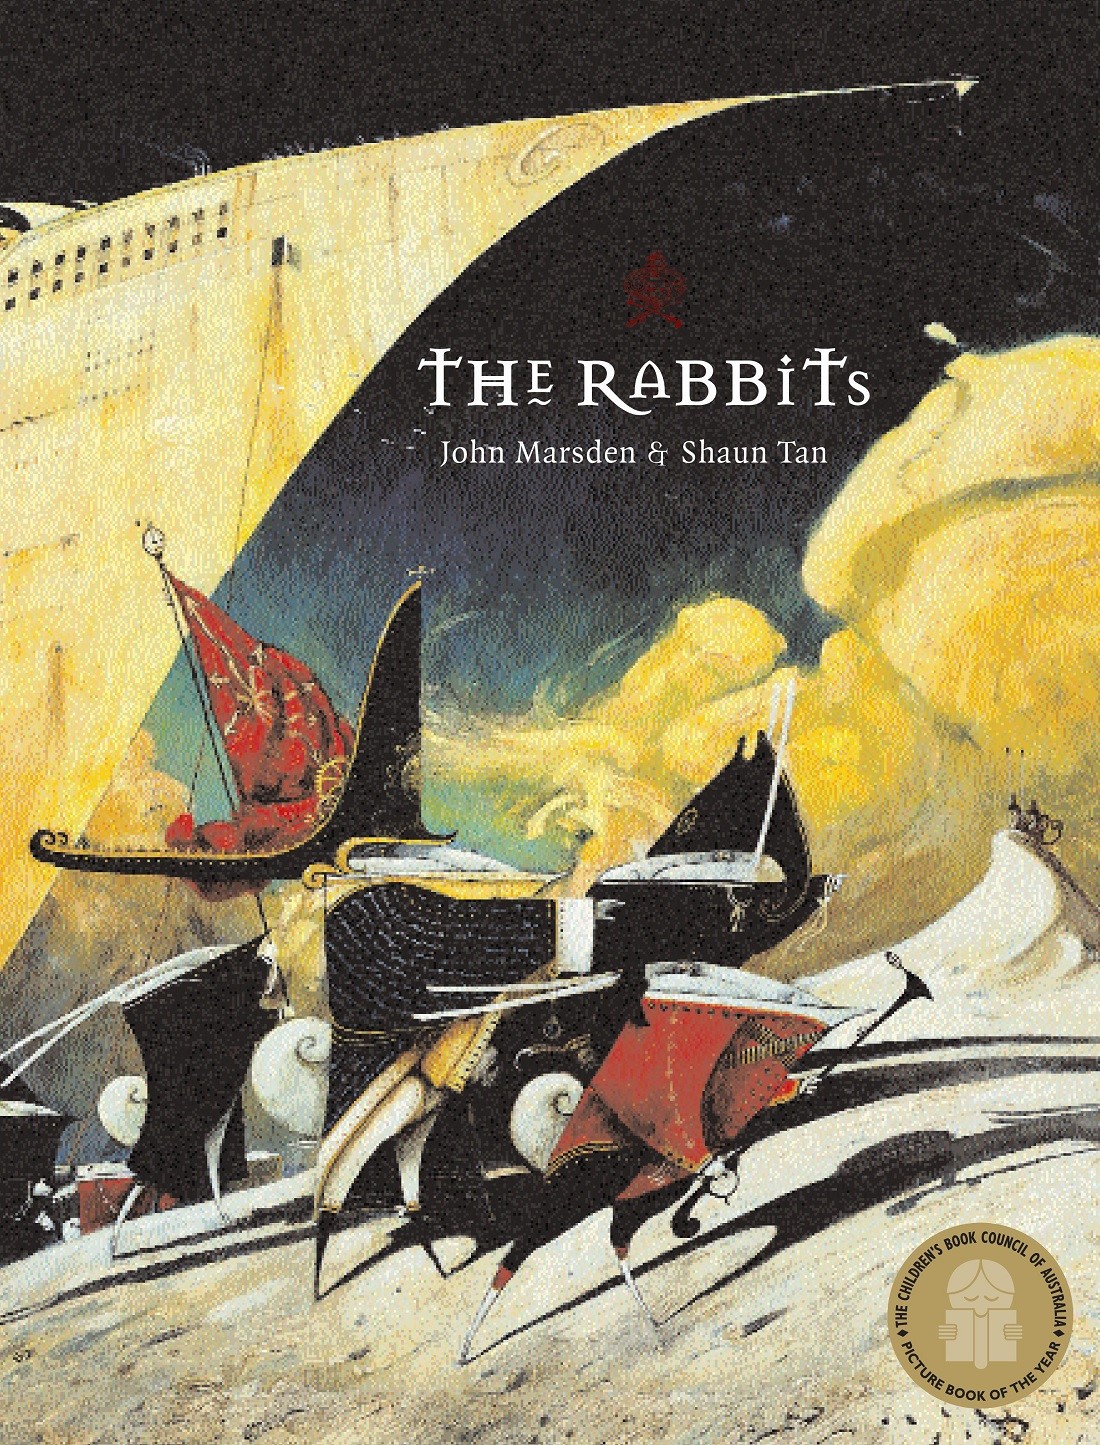 The front cover of "The Rabbits", by John Marsden and illustrated by Shaun Tan.